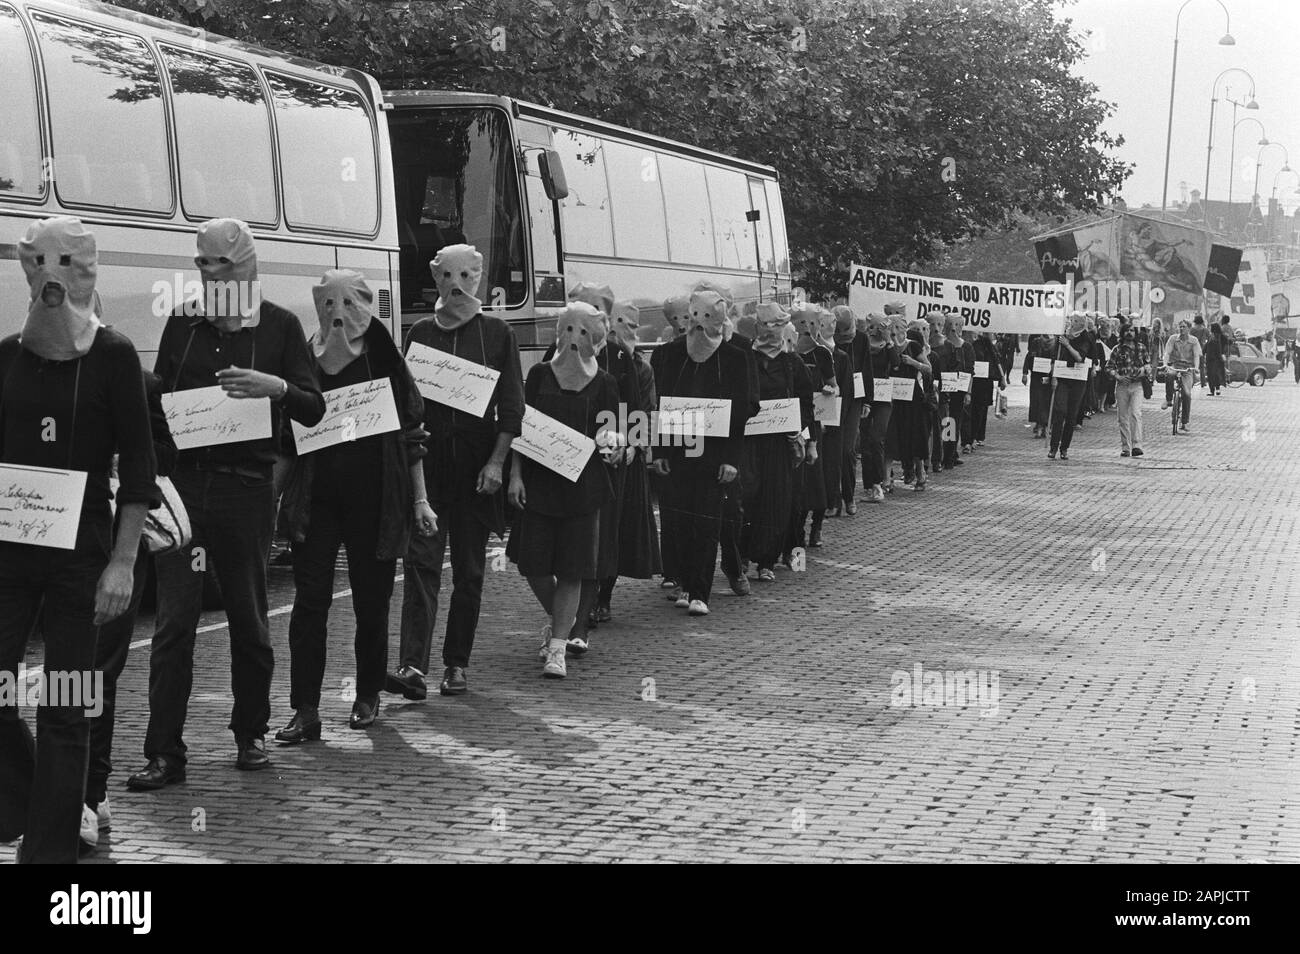 Demonstration in Amsterdam for a hundred missing artists Description: Protesters in Amsterdam, with caps on, carry signs showing the names of 100 missing artists Date: September 12, 1981 Location: Amsterdam, Noord-Holland Keywords: artists, demonstrations, signs Stock Photo